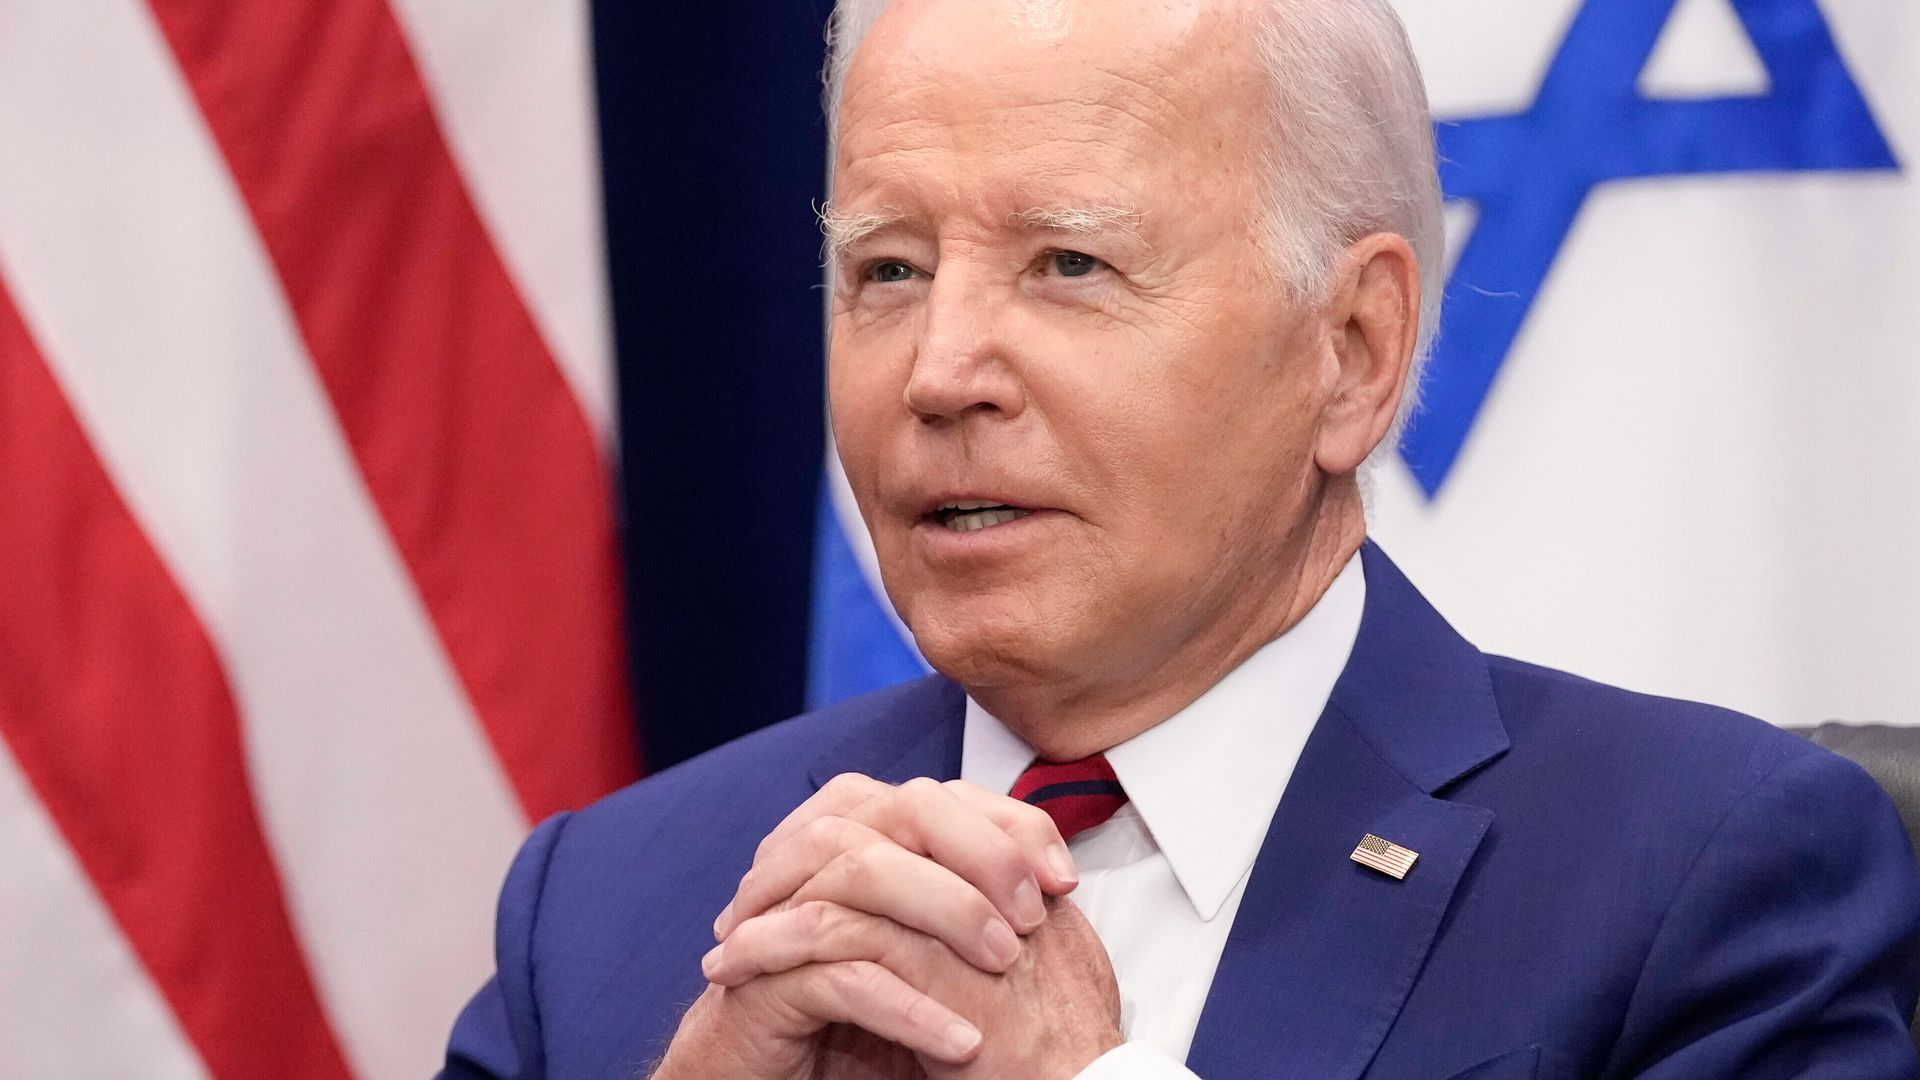 Pro-Palestinian U.S. officials in various agencies are corrupting the Biden Administration’s position on the Israel-Hamas war.